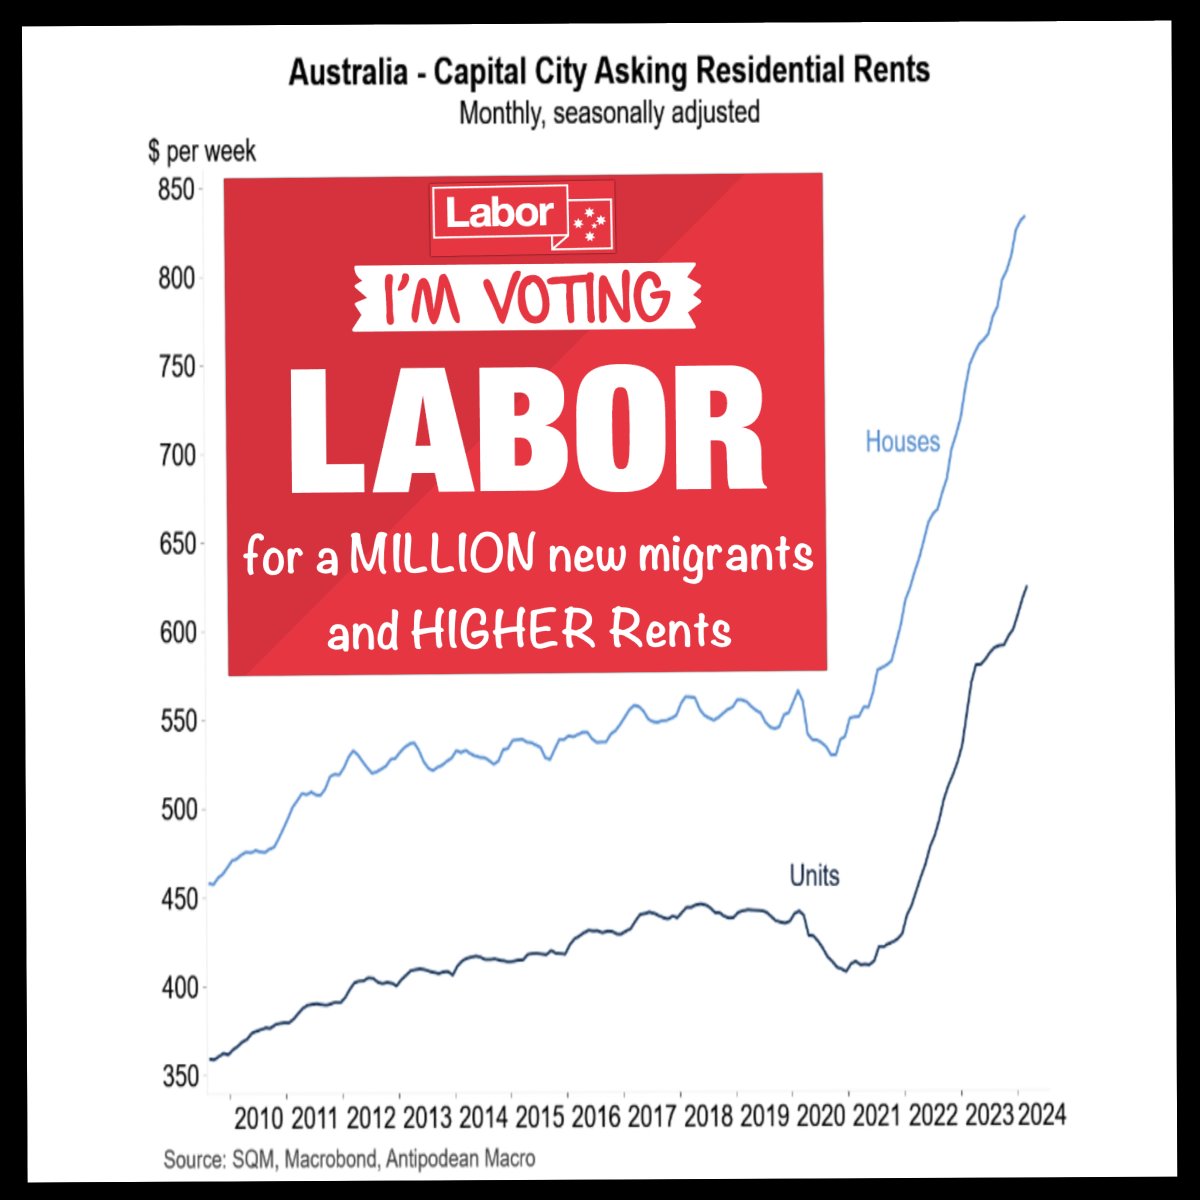 About one-third of Australians rent, and majority are Labor voters. And they are being smashed by Rent inflation, with their standard of living in free fall all due to Albanese’s turbo migration policy - importing hundreds of thousands more people than the nation can house.…